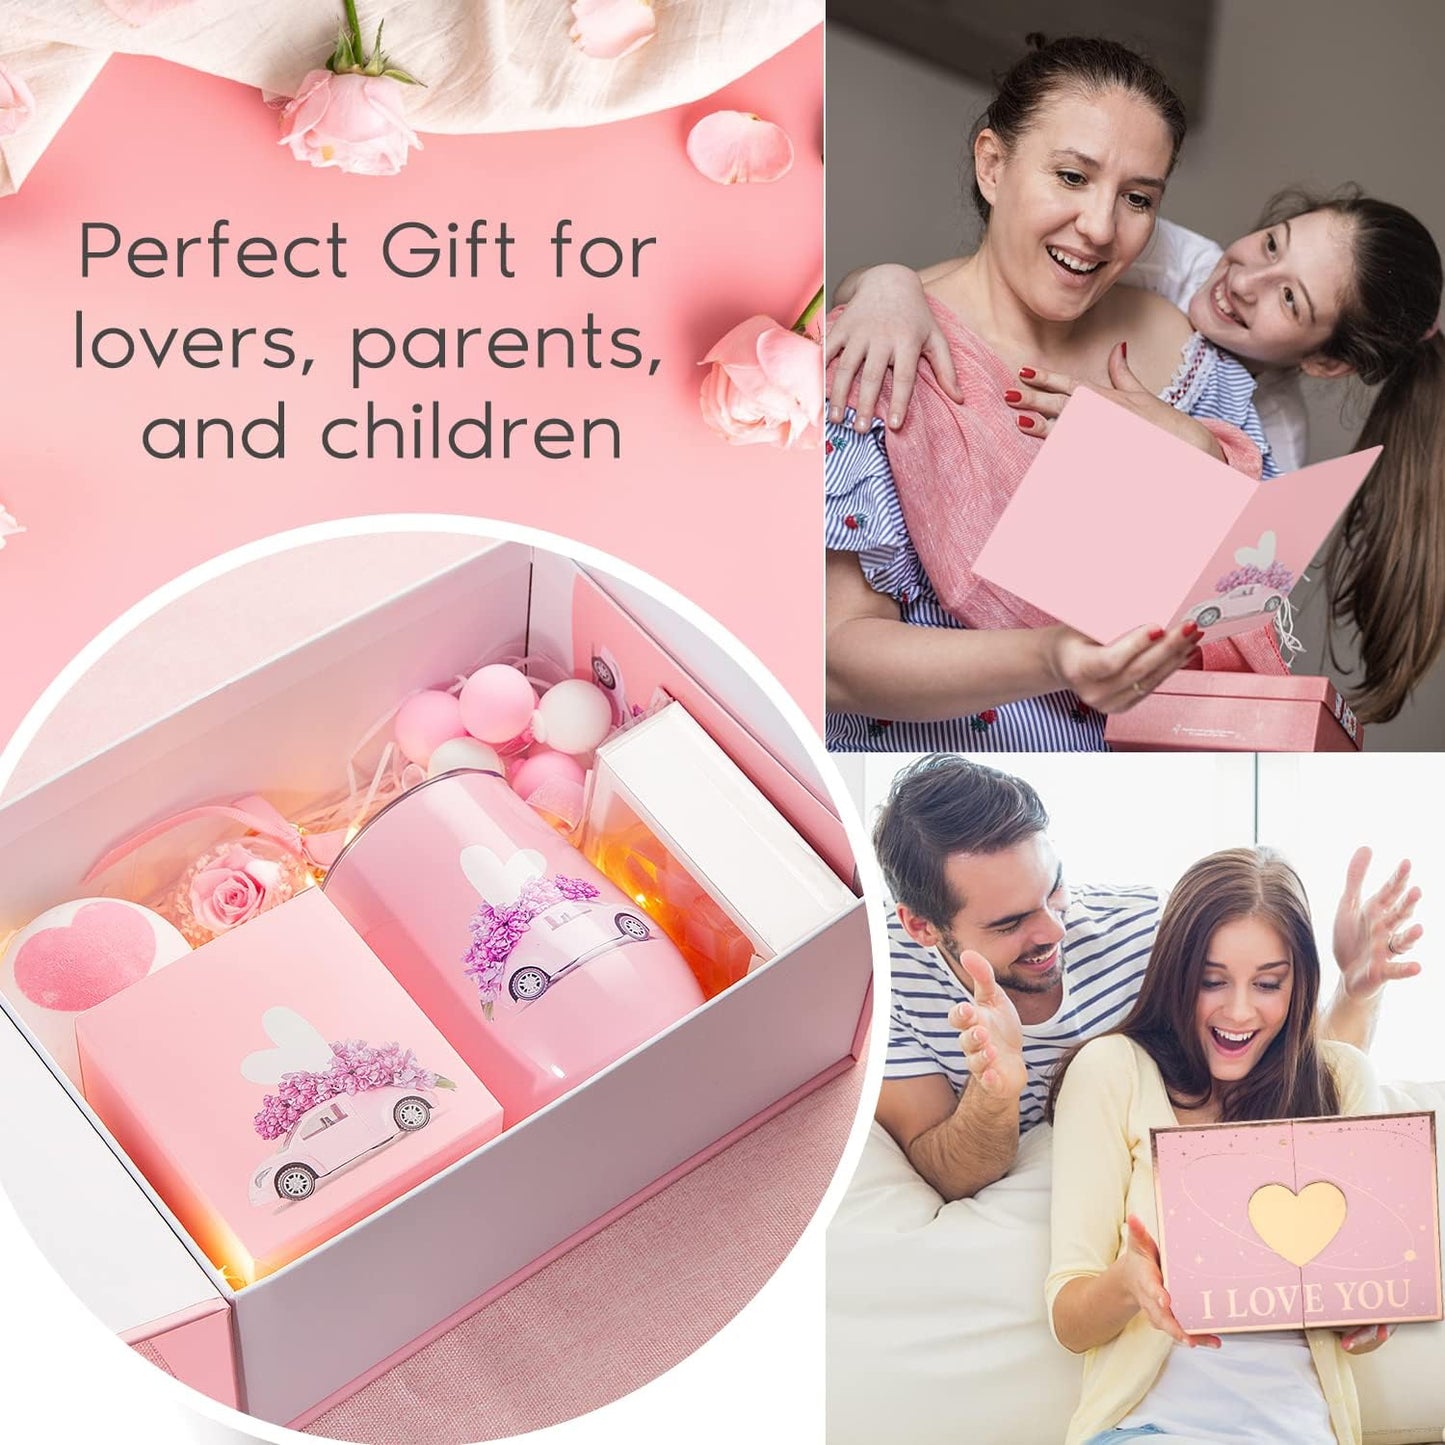 Birthday Gifts for Girlfriend, Cute Couple Gifts for Girlfriends - I Love You - Romantic Gifts for Her, Unique Gift Basket for Women, Mom, Sister, Friends,Love You Gifts for Mom from Daughter